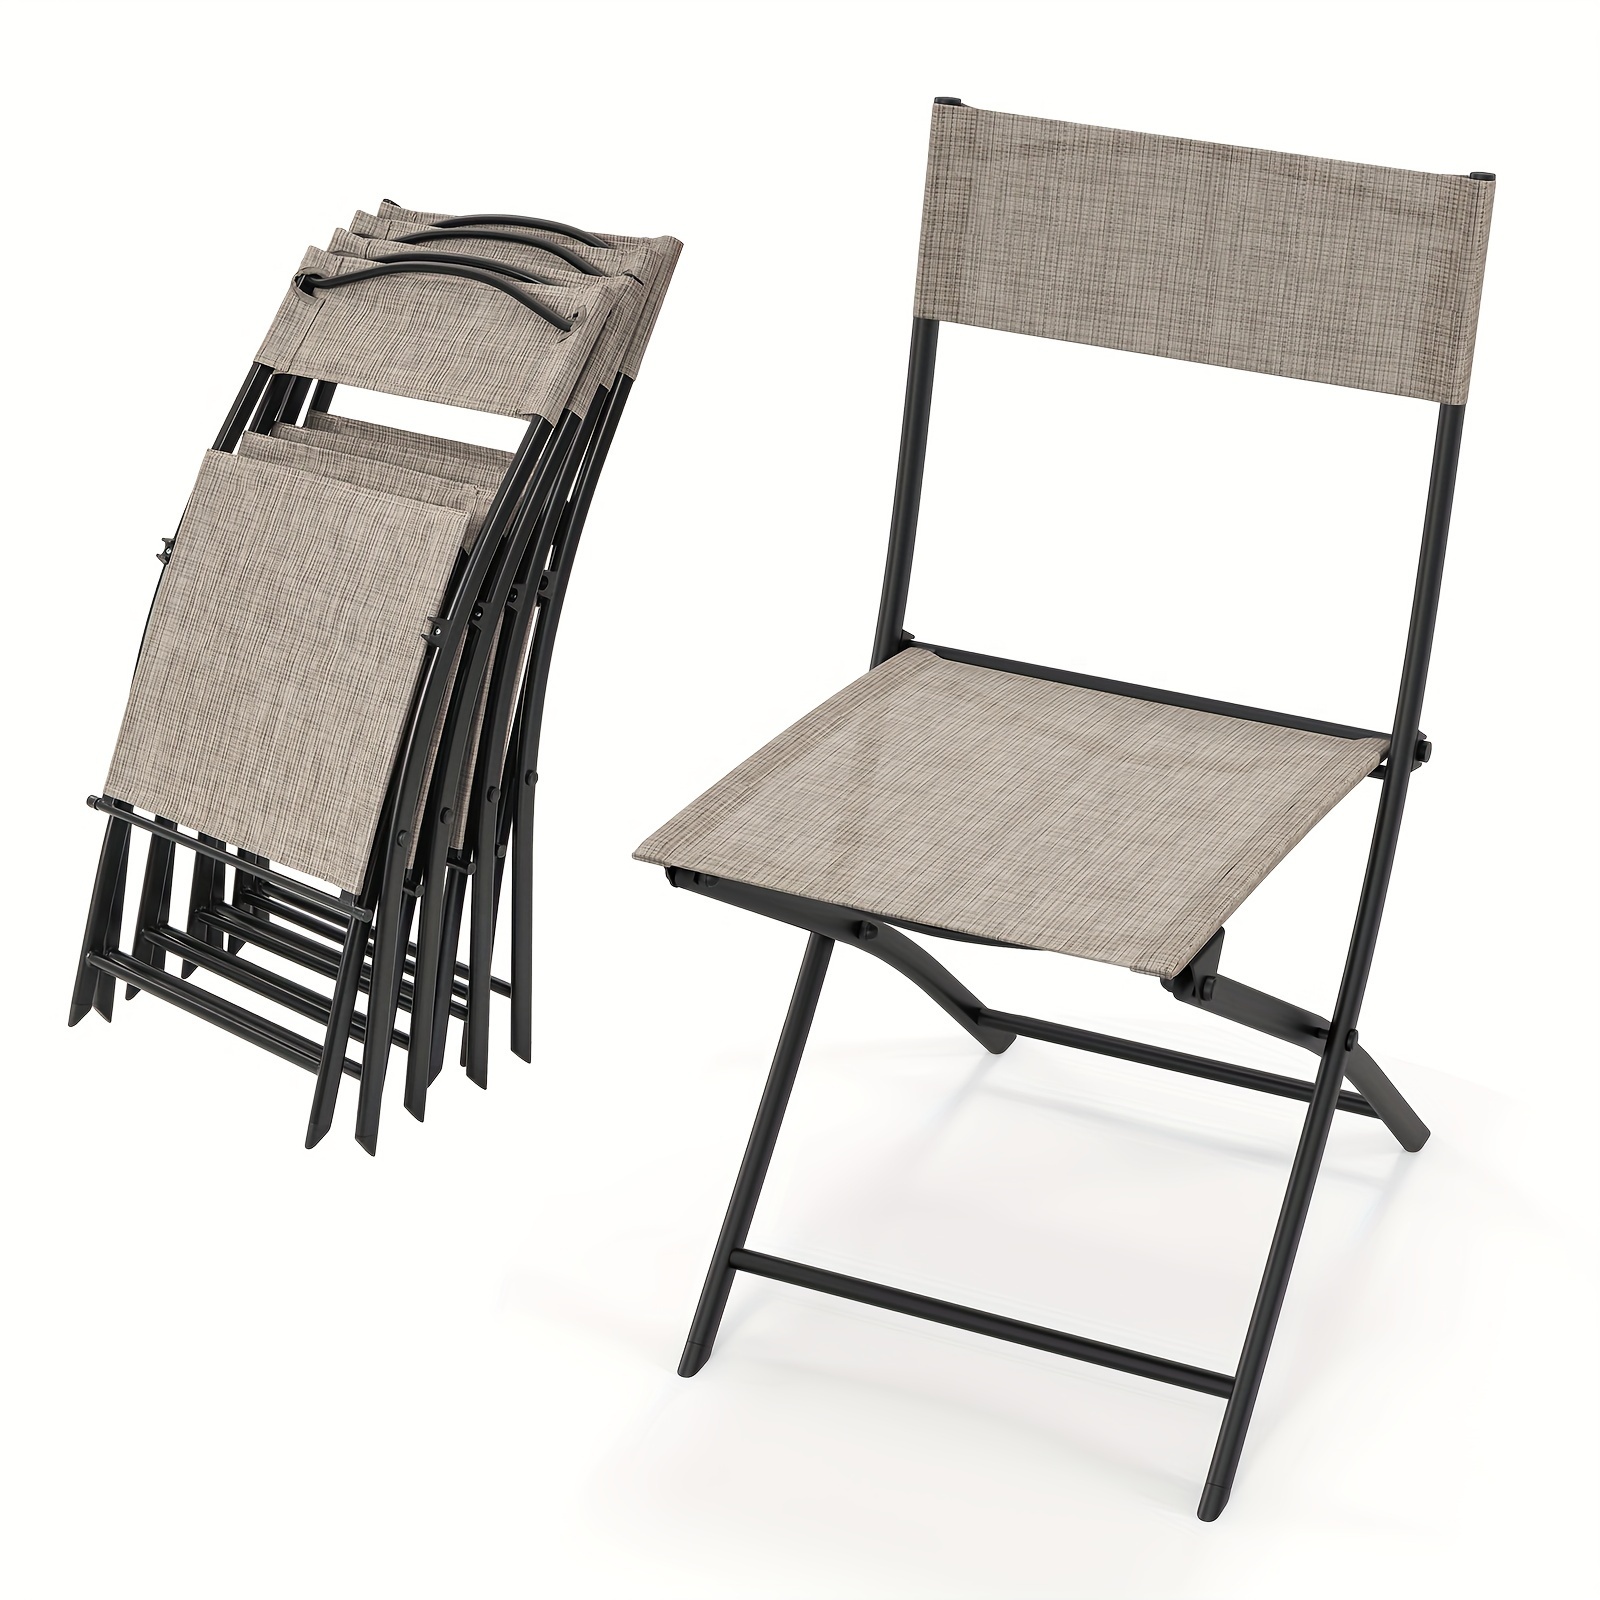 Costway 4pcs Patio Folding Chairs Set Portable Camping Chair